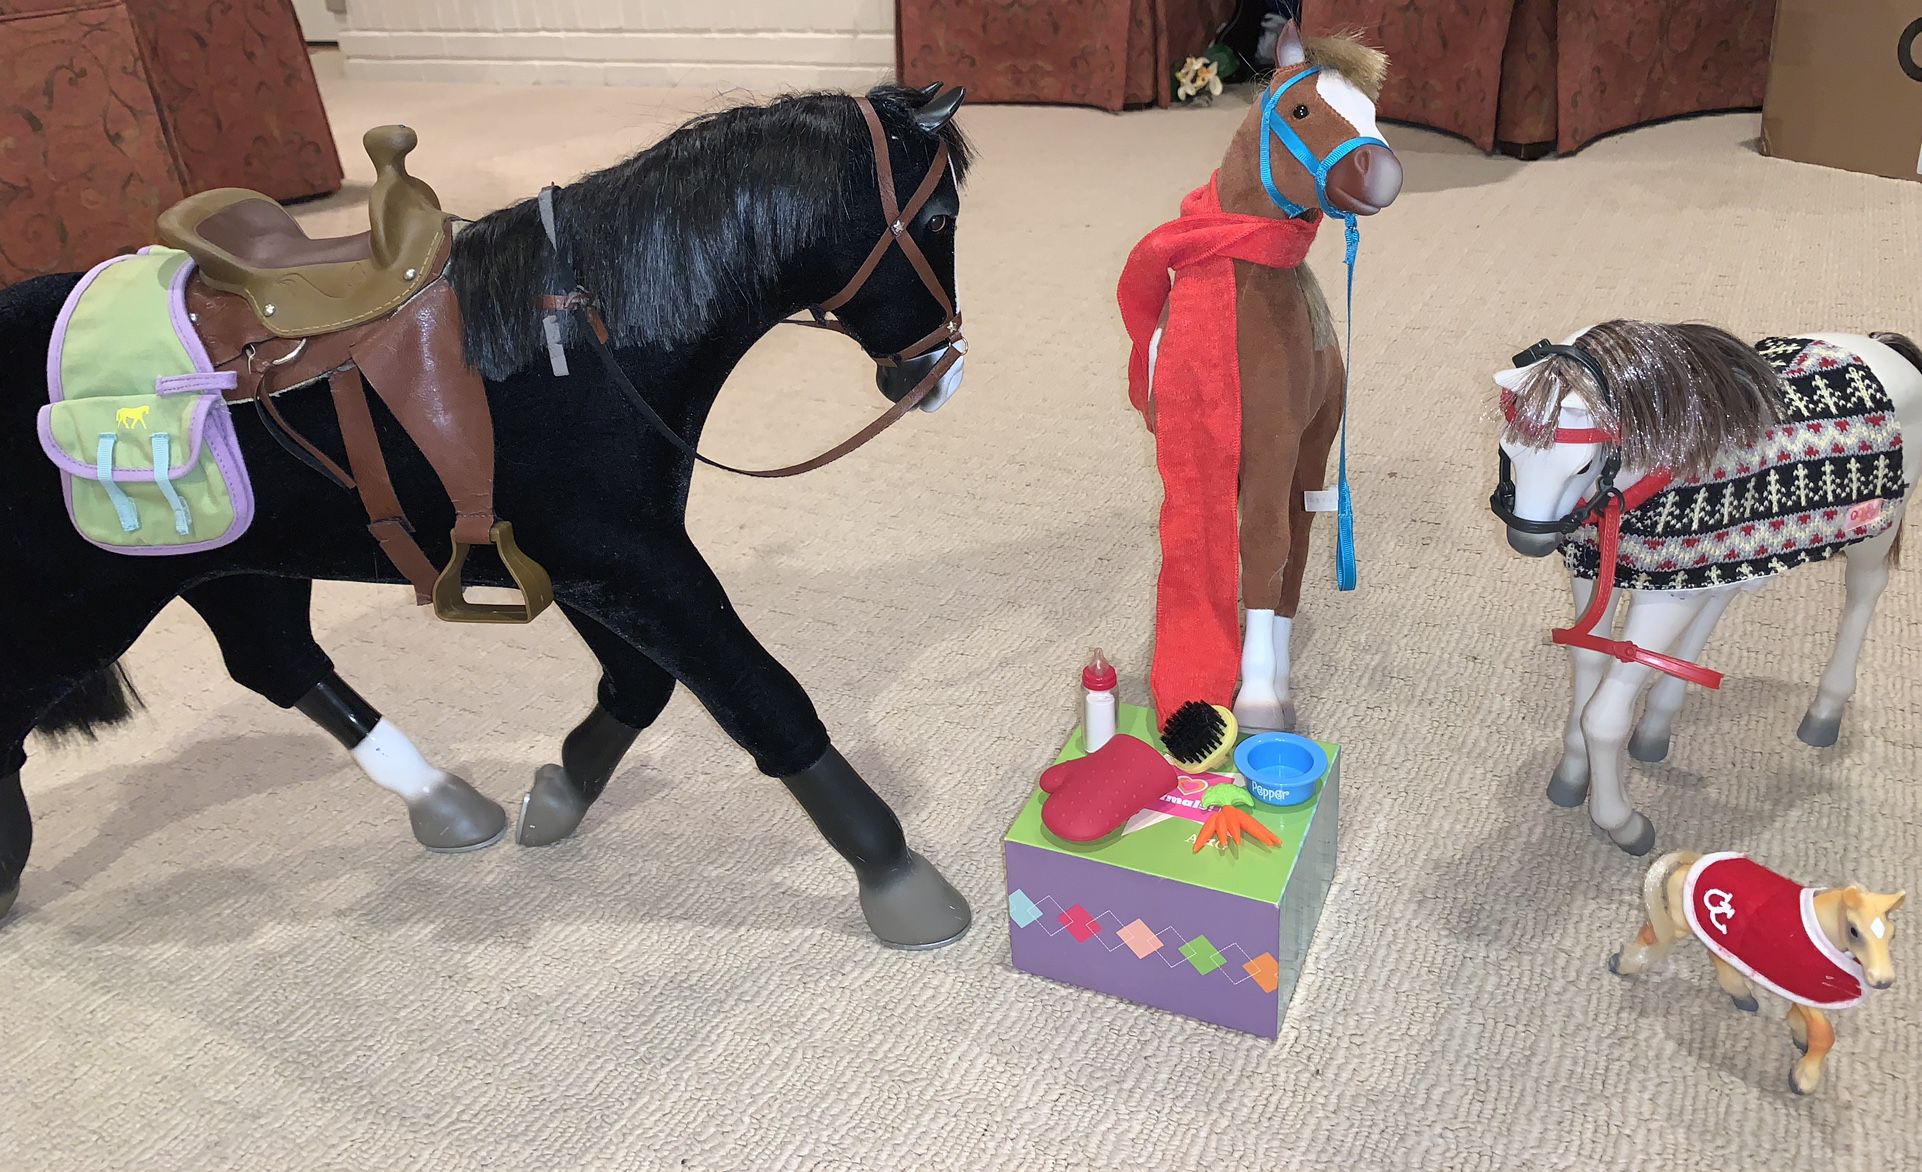 American Girl Doll Horses and accessories 